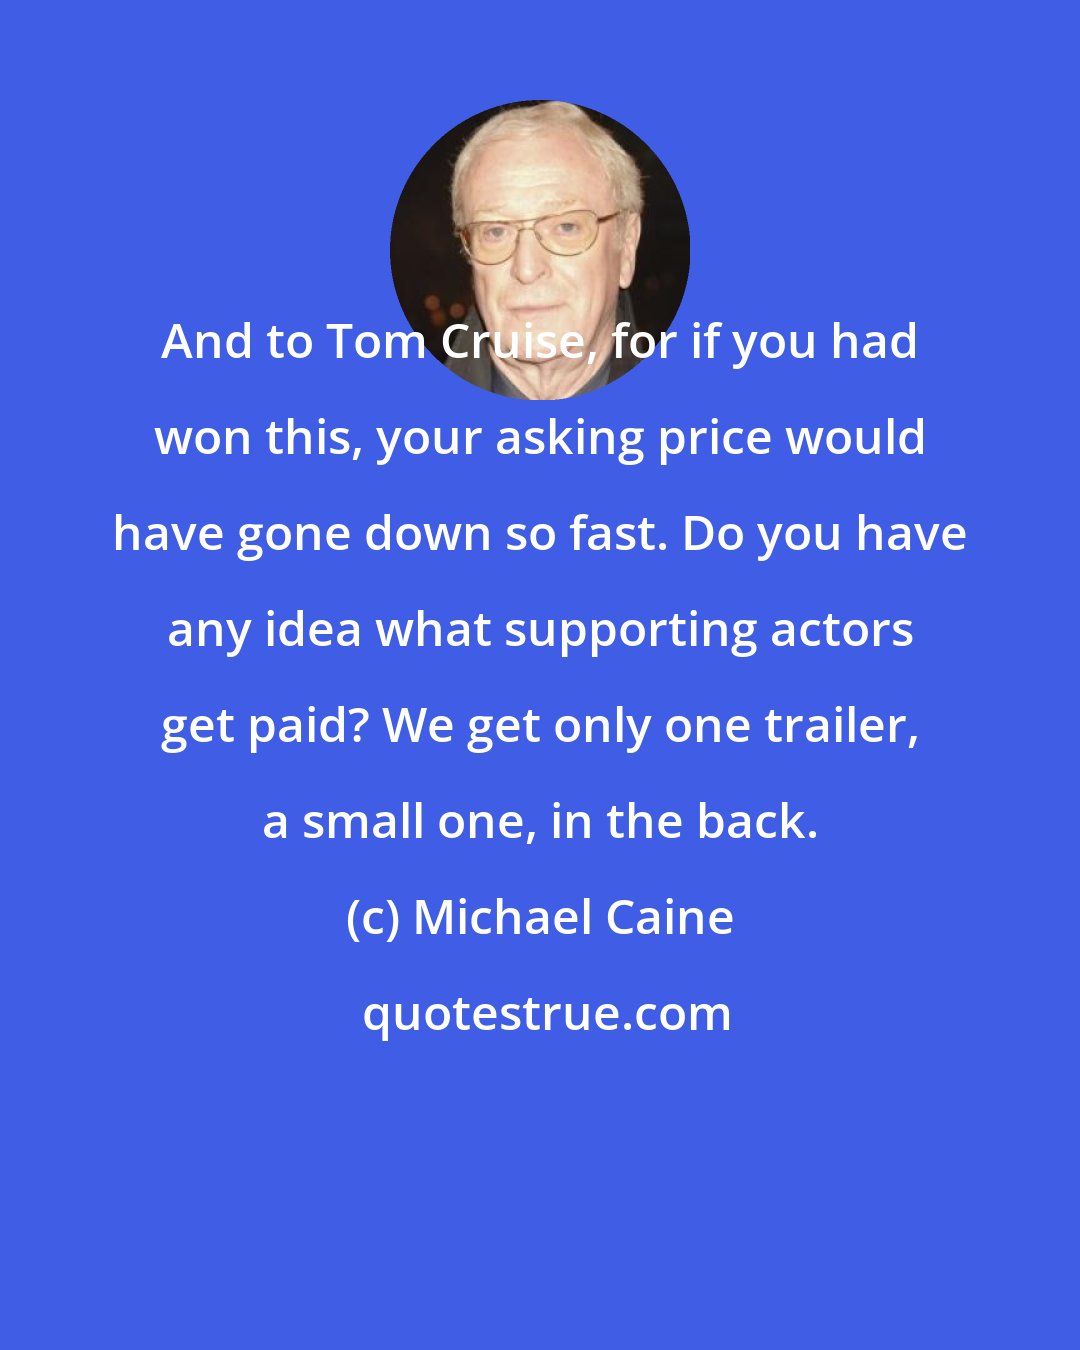 Michael Caine: And to Tom Cruise, for if you had won this, your asking price would have gone down so fast. Do you have any idea what supporting actors get paid? We get only one trailer, a small one, in the back.